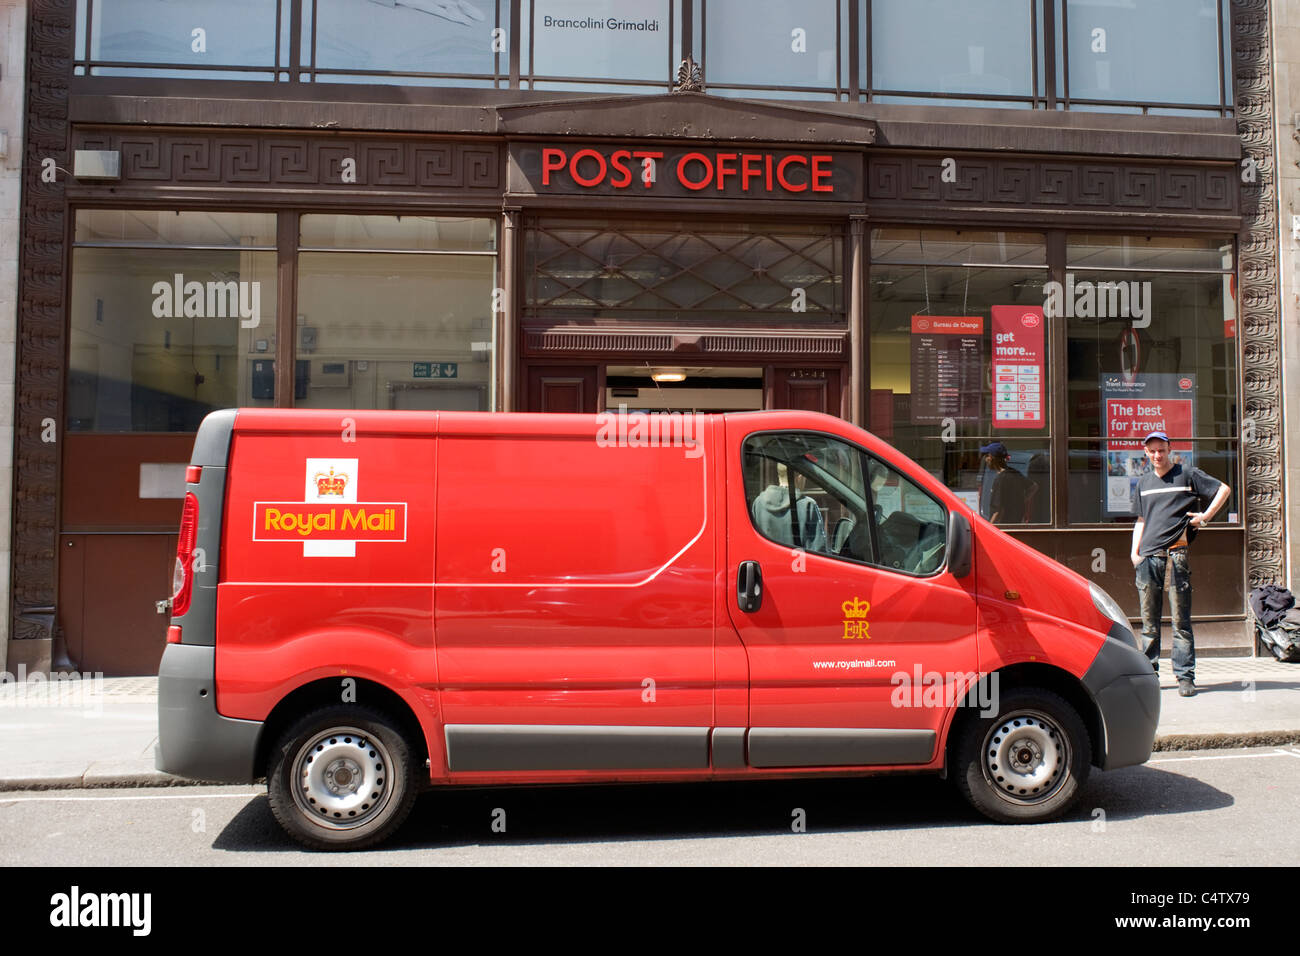 London Mayfair Albemarle Street Post Office with red Royal Mail van parked outside Stock Photo